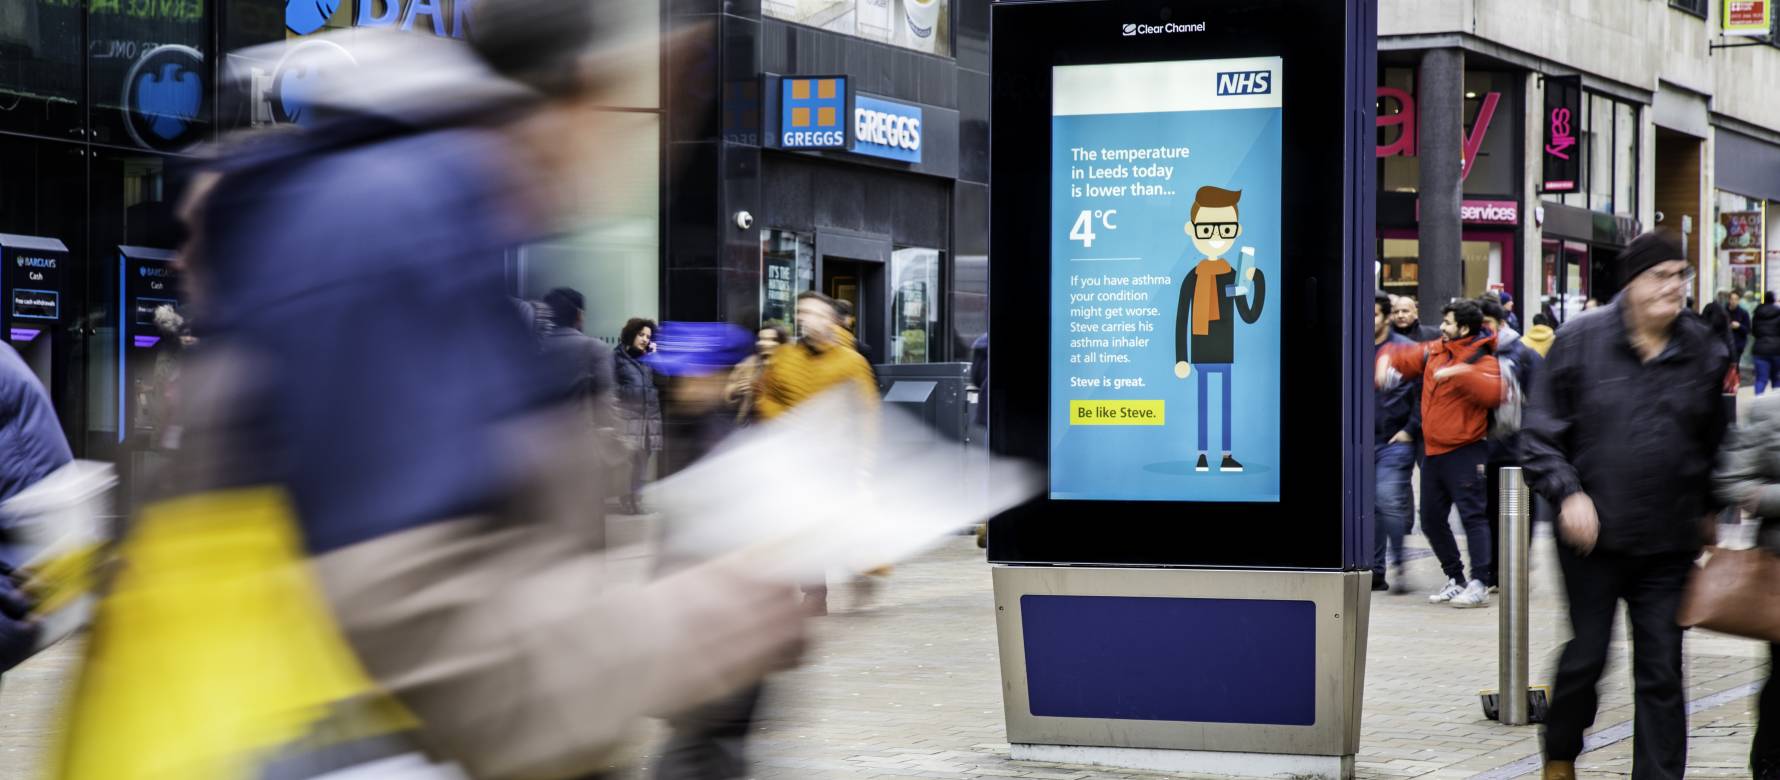 Clear Channel Adshel Live screen showing NHS temperature-triggered digital advertising campaign on a busy high street